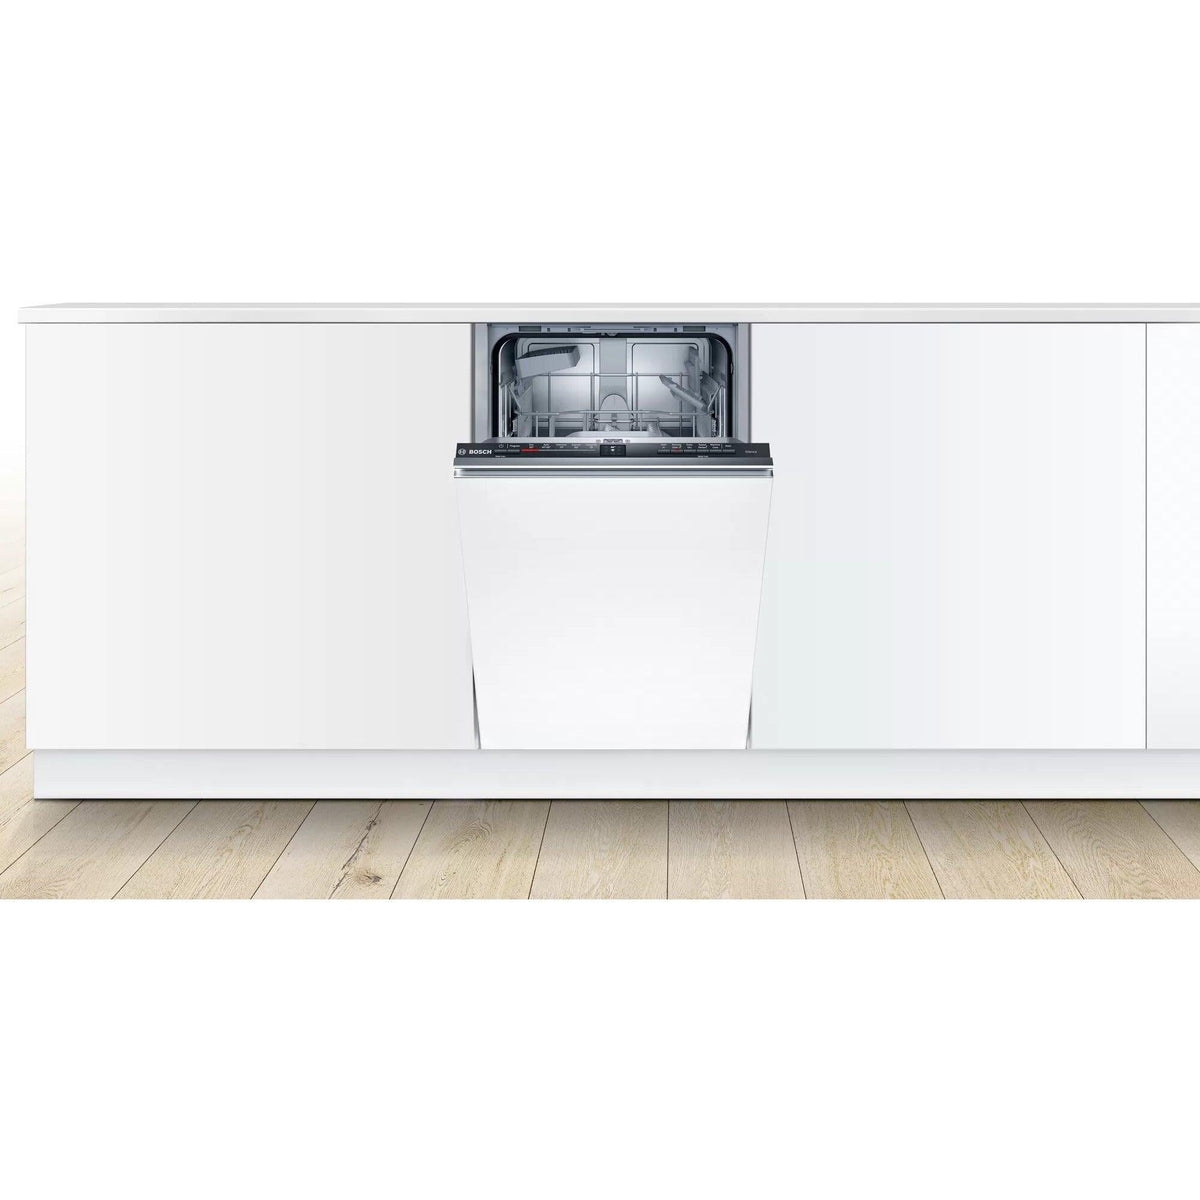 Bosch 45CM Serie 2 Fully Integrated Slimline Dishwasher - White | SPV2HKX39G from DID Electrical - guaranteed Irish, guaranteed quality service. (6977495400636)